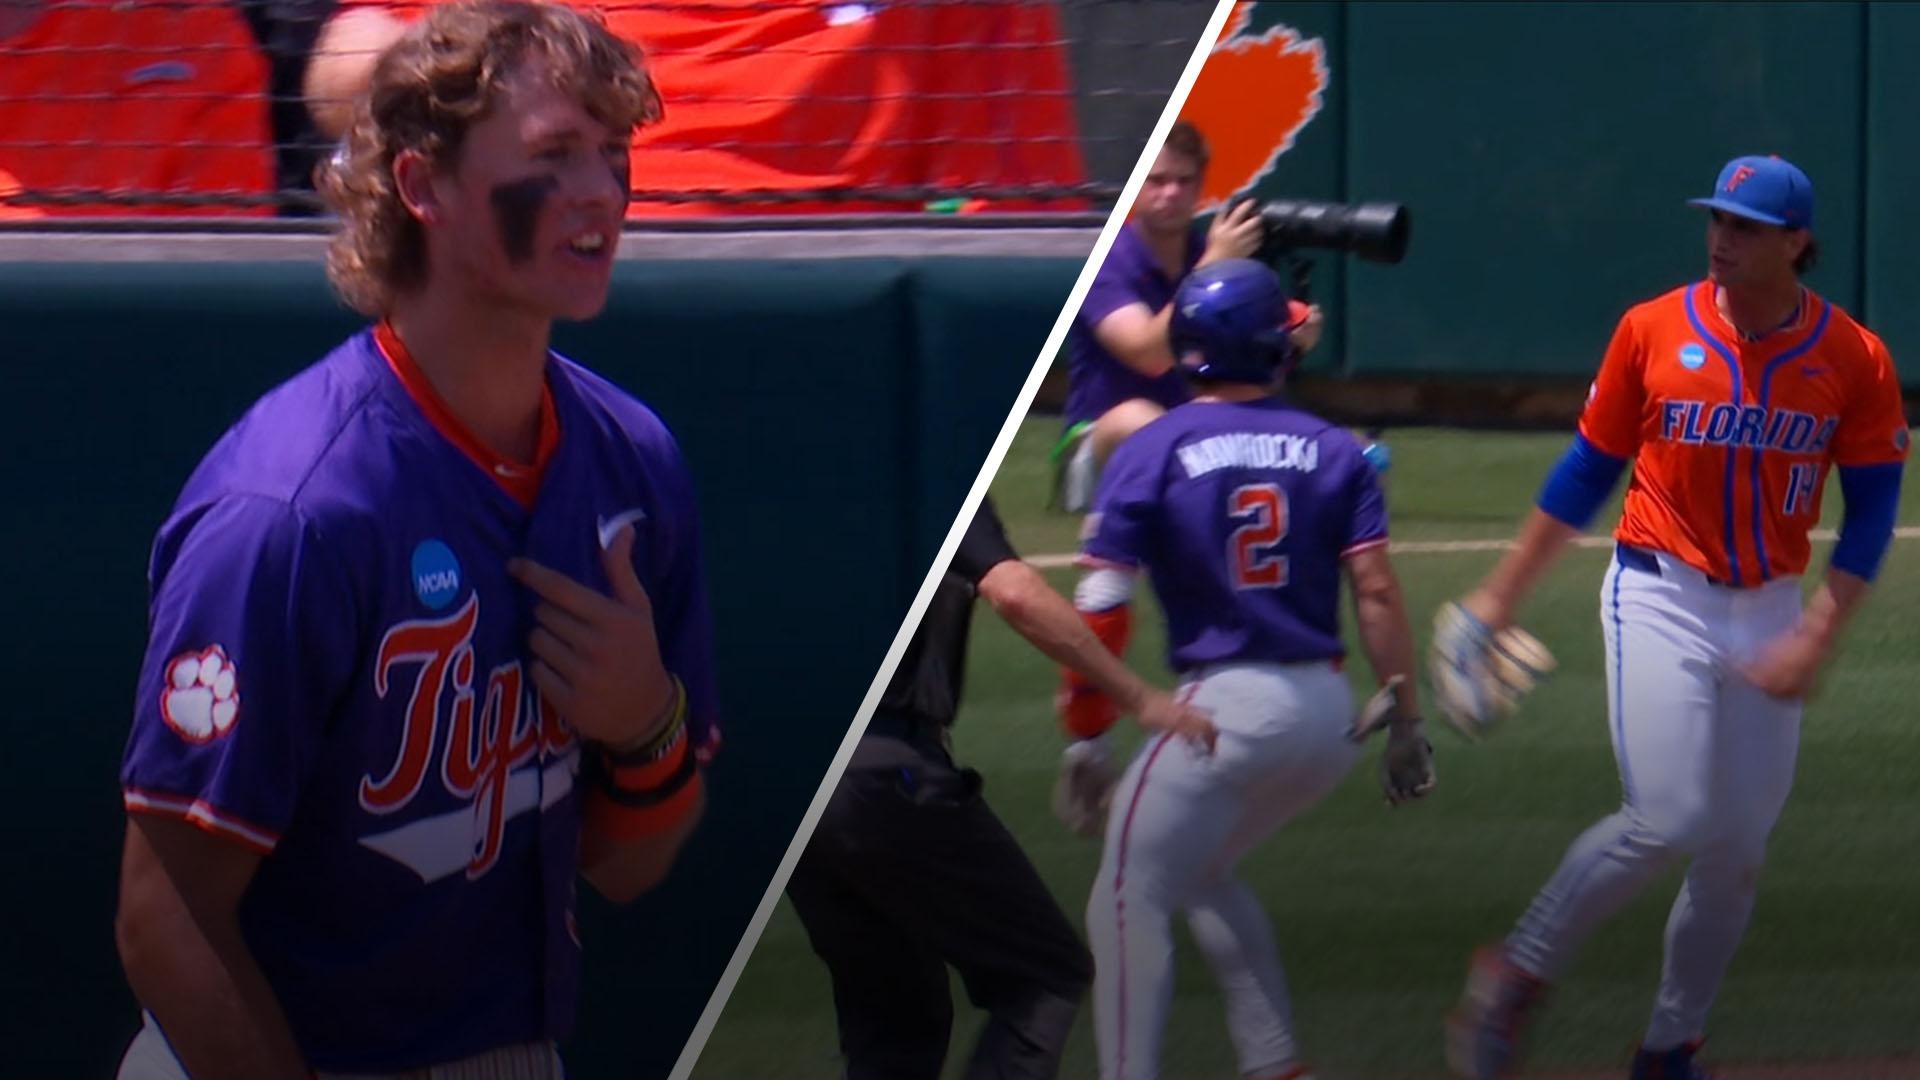 Clemson player ejected after collision on first-base line results in skirmish